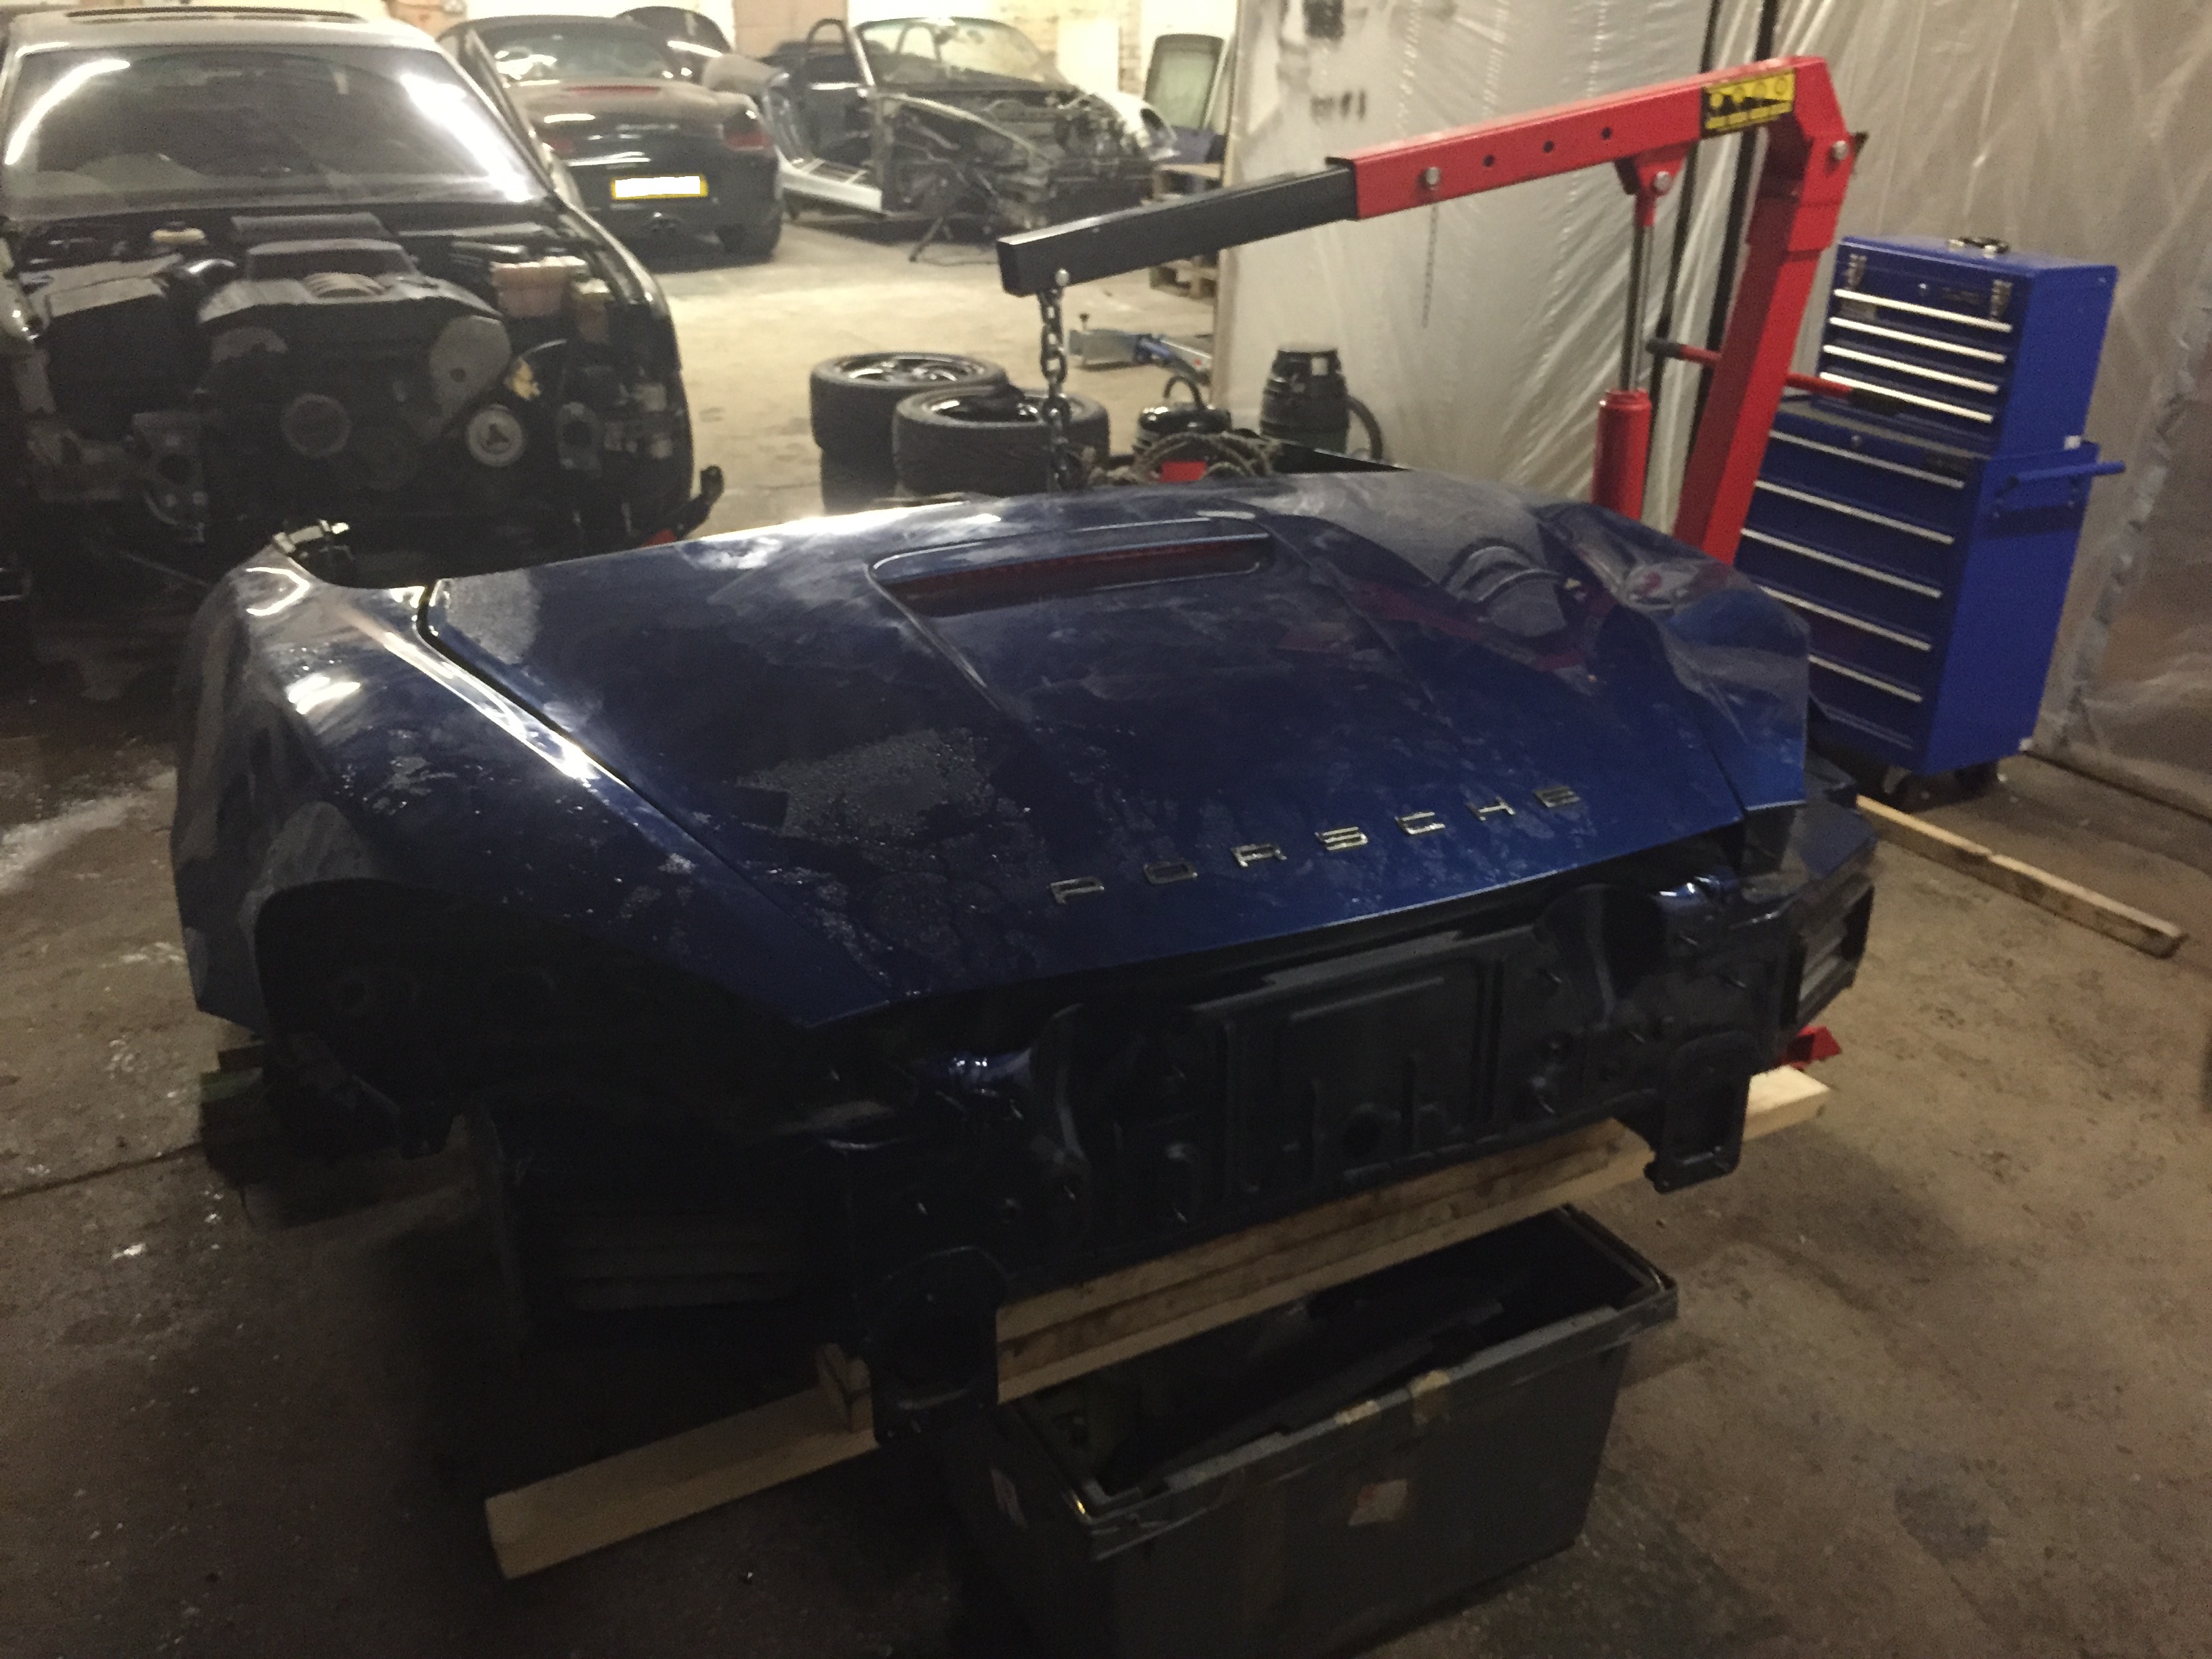 986 Porsche Boxster to 981 body update conversion - Page 1 - Boxster/Cayman - PistonHeads